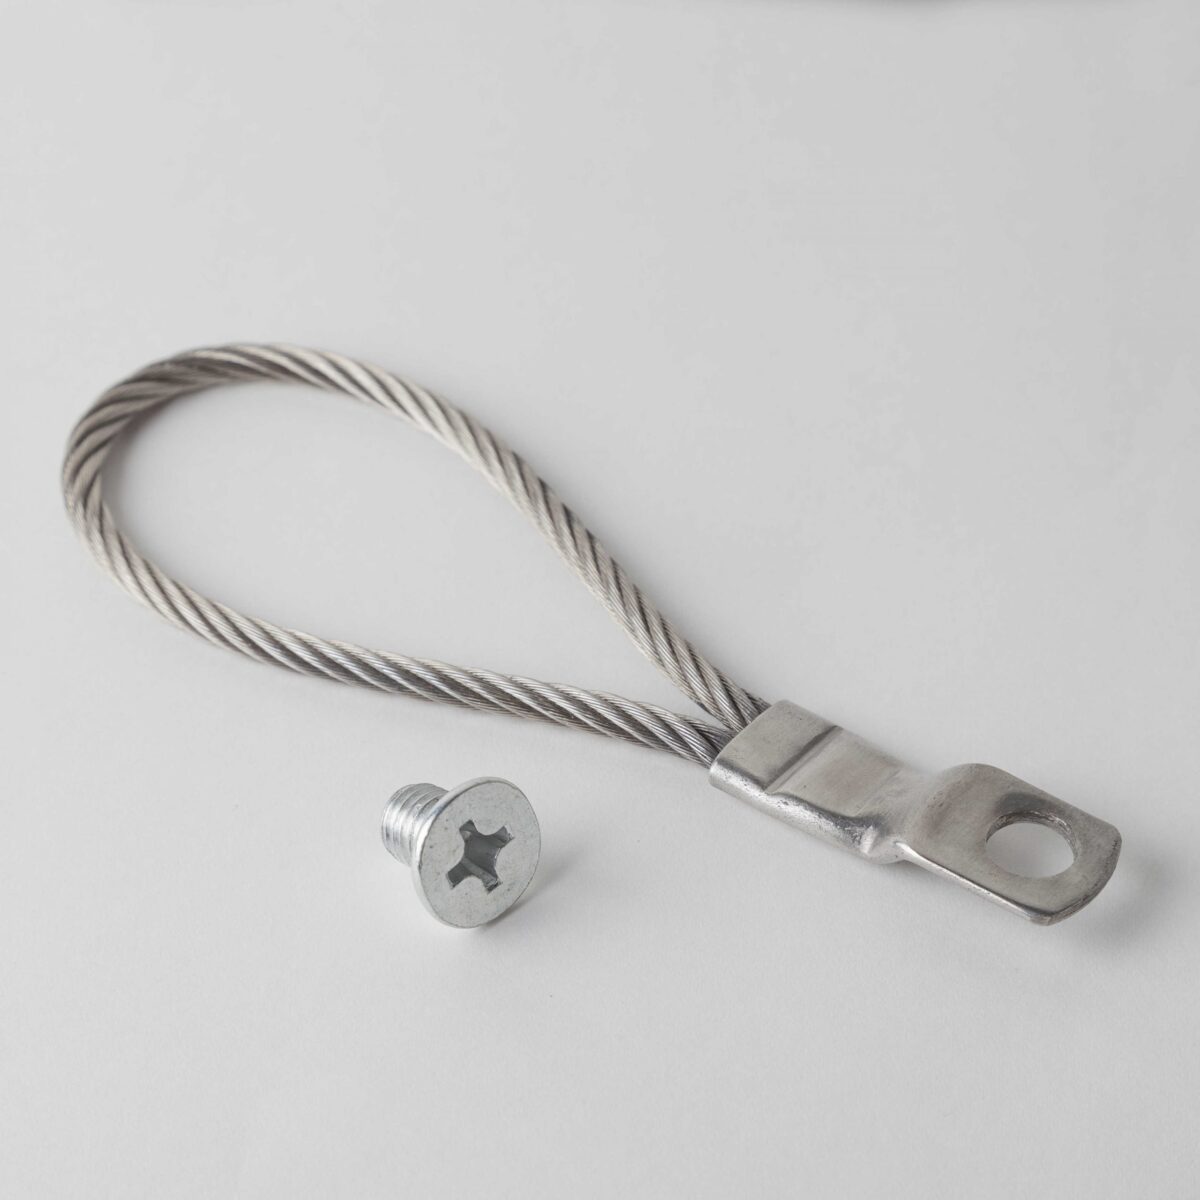 Cable Neck Lanyard For Energy Bust Forms